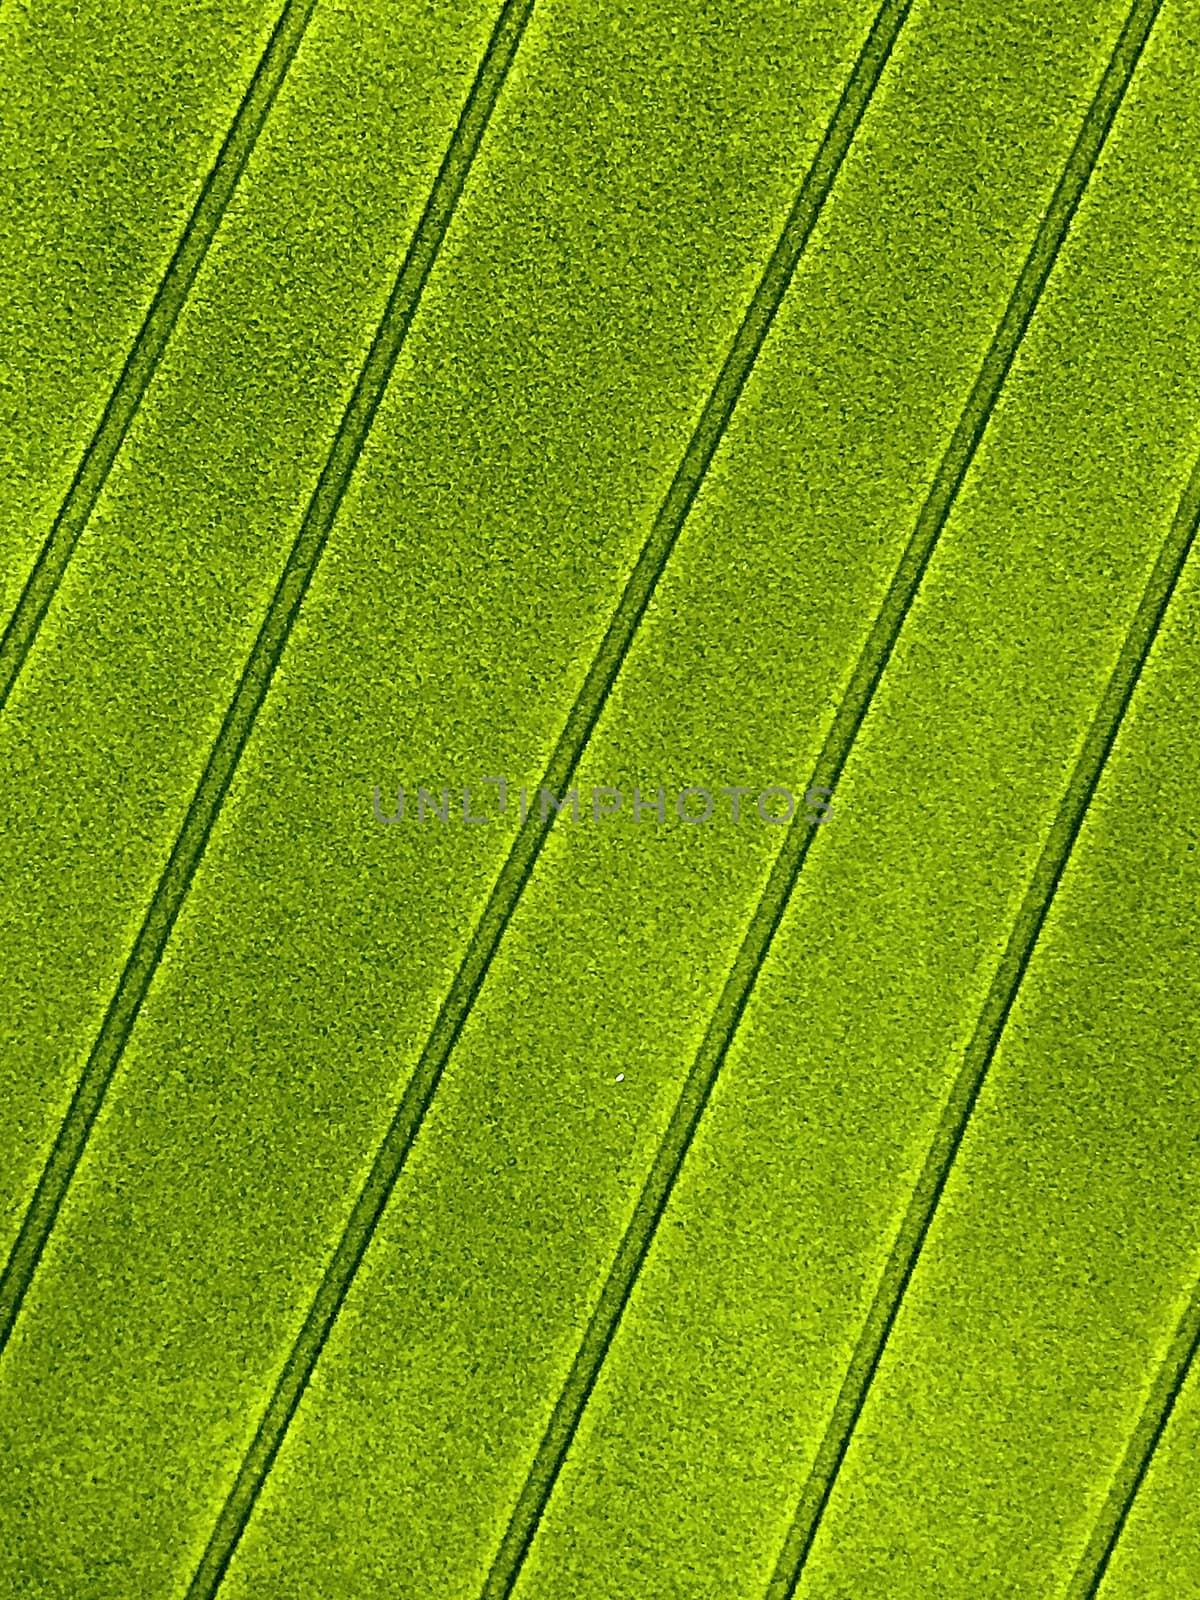 Green background texture for text area and lifestyle